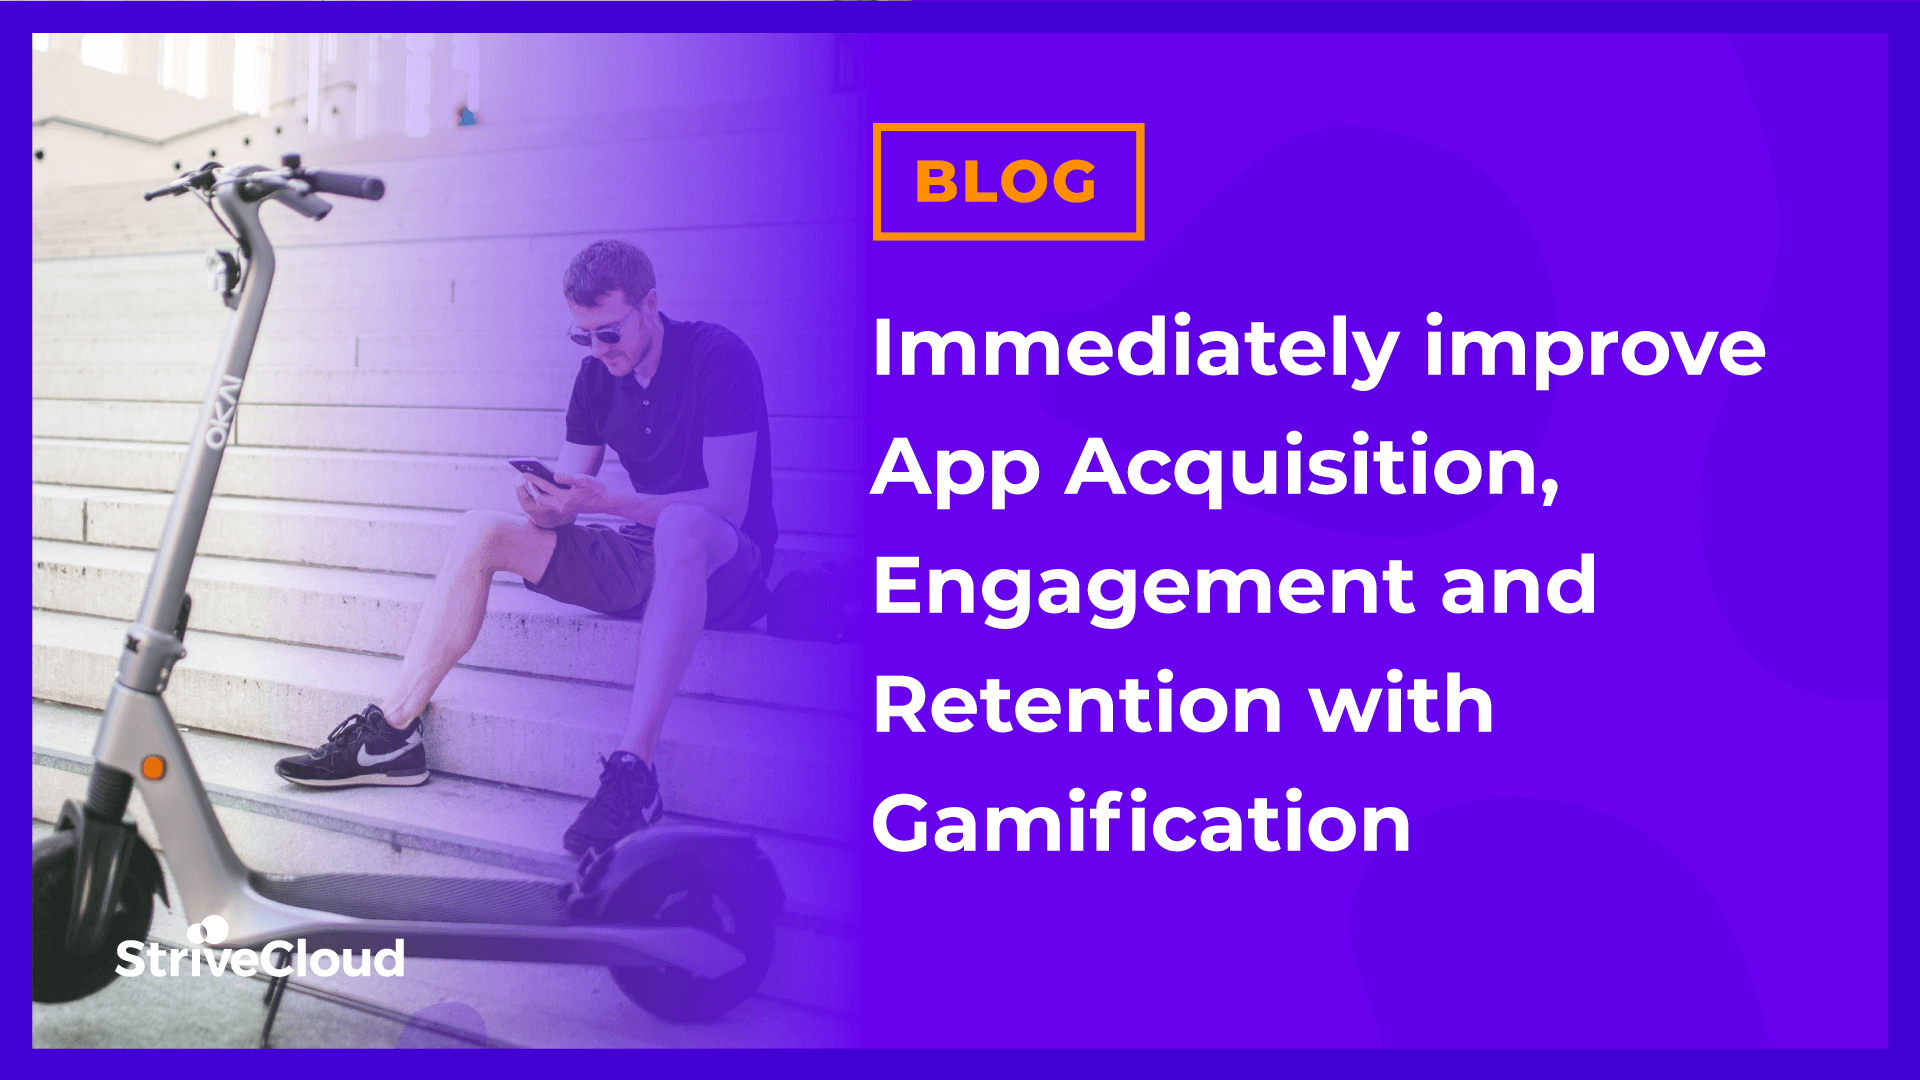 Immediately improve App Acquisition, Engagement and Retention with Gamification